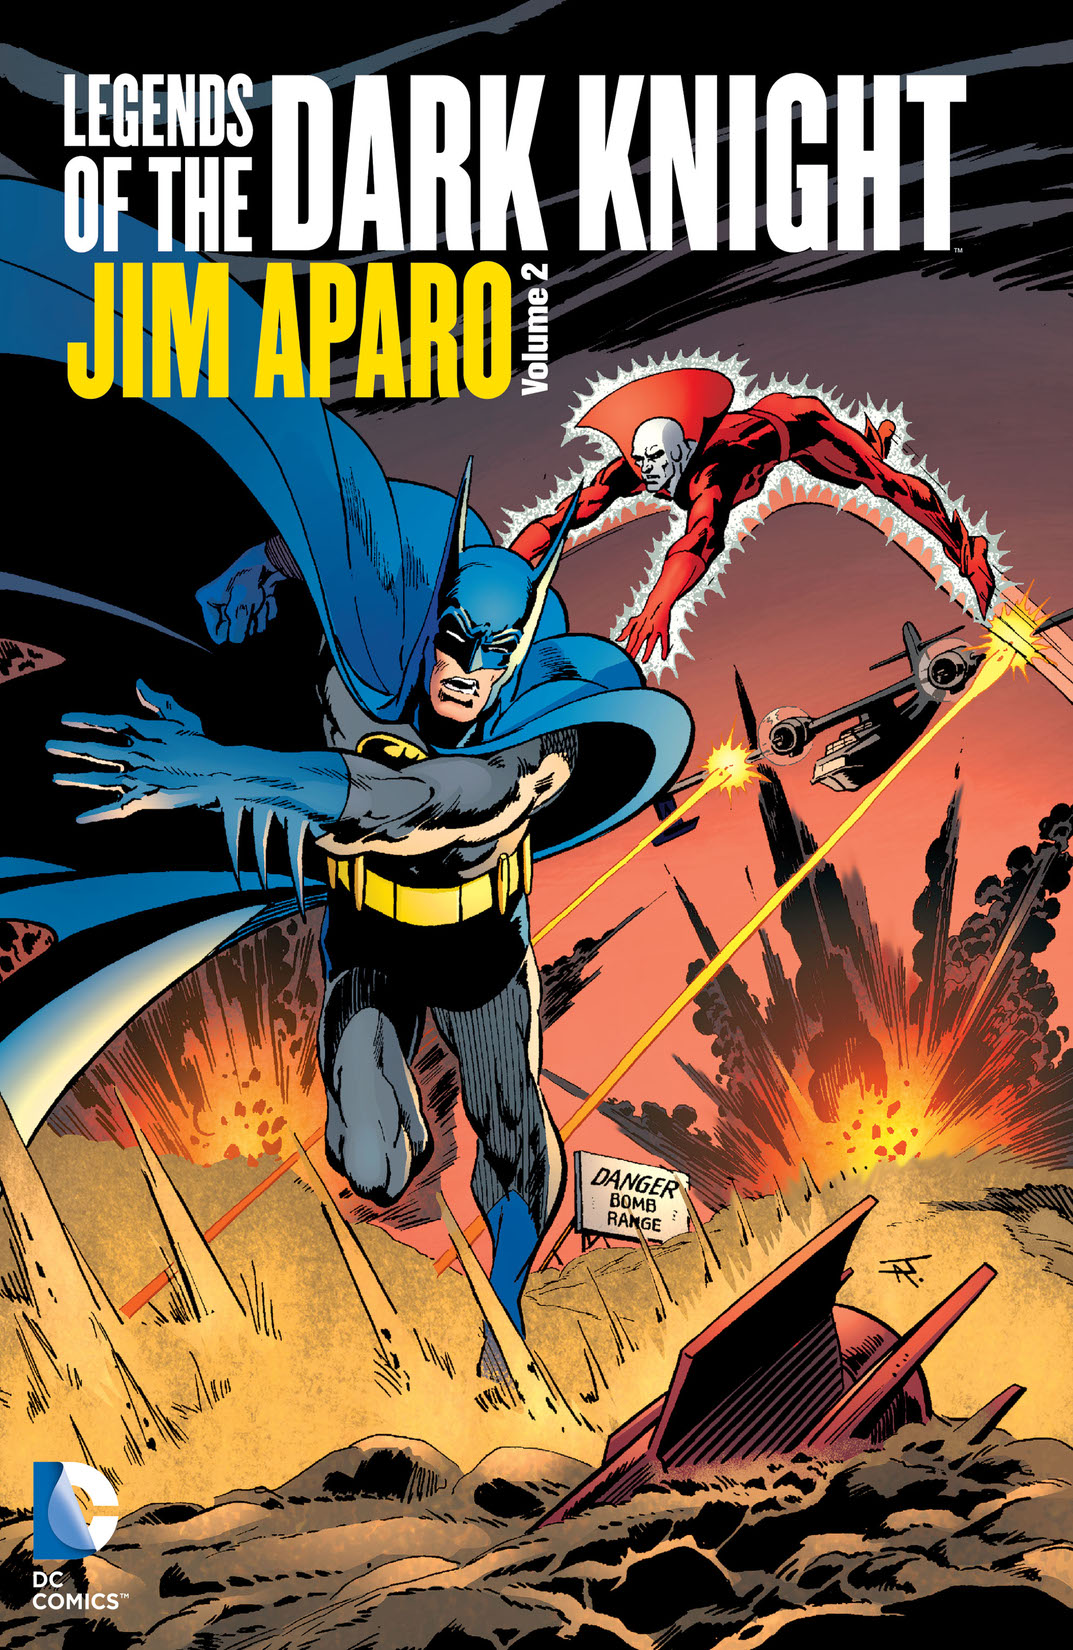 Legends of the Dark Knight: Jim Aparo Vol. 2 preview images